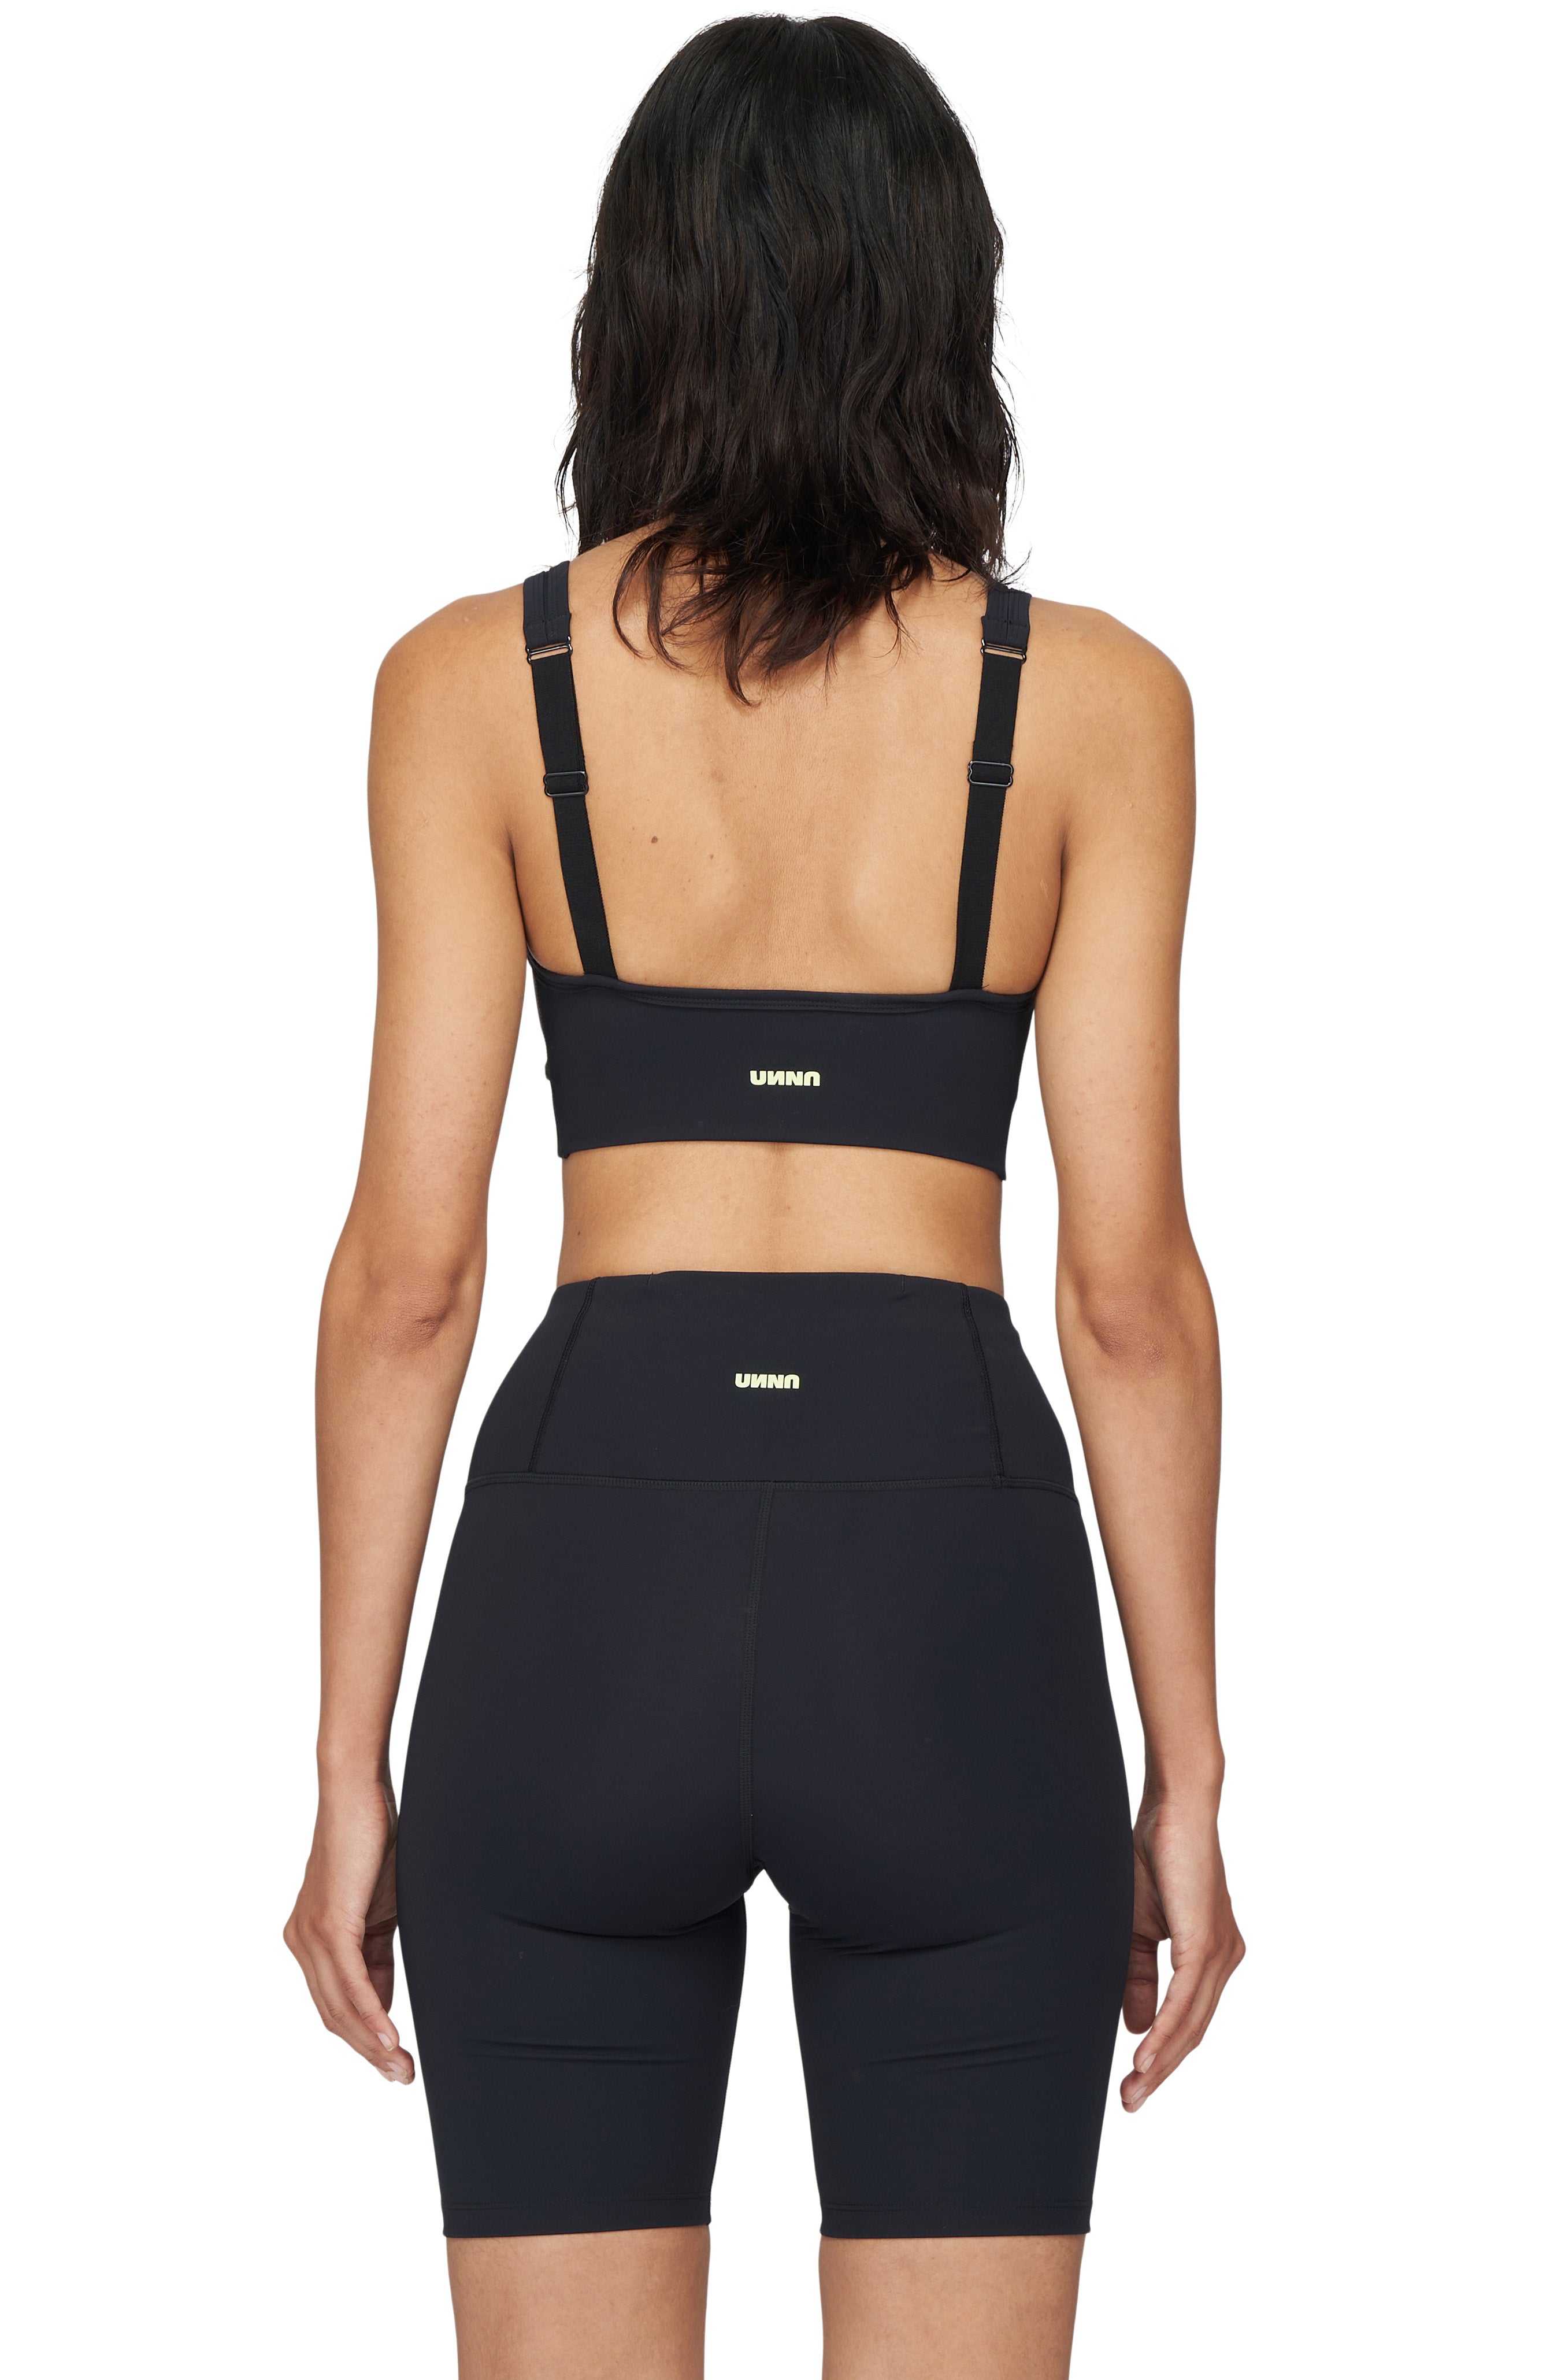 Good Place Sports Bra from UNNA in black 